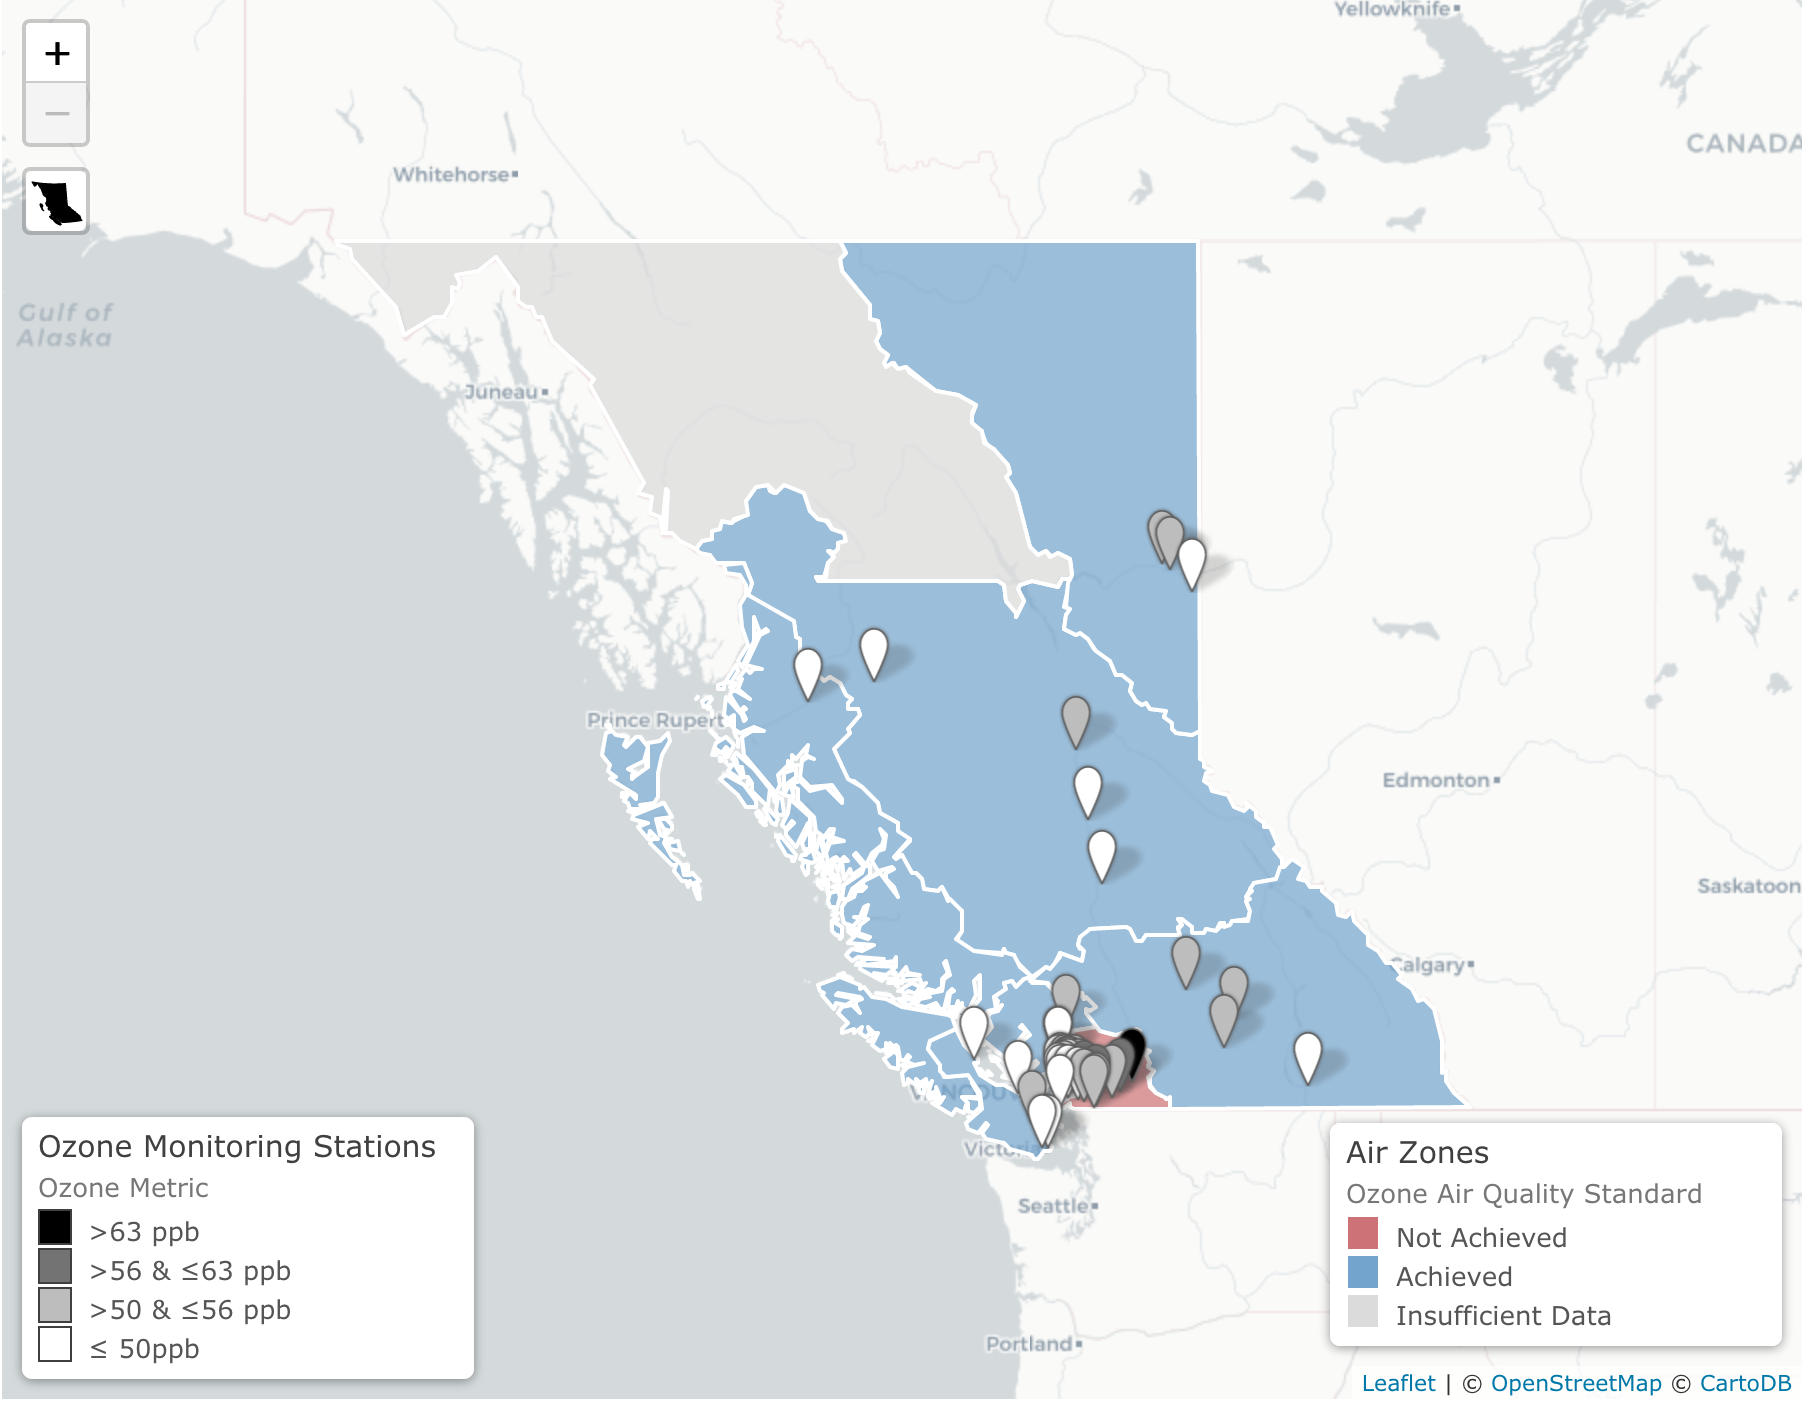 Image of interactive map of air quality monitoring stations and air zones that meet or exceed Canadian Ambient Air Quality Standards for ground-level ozone.